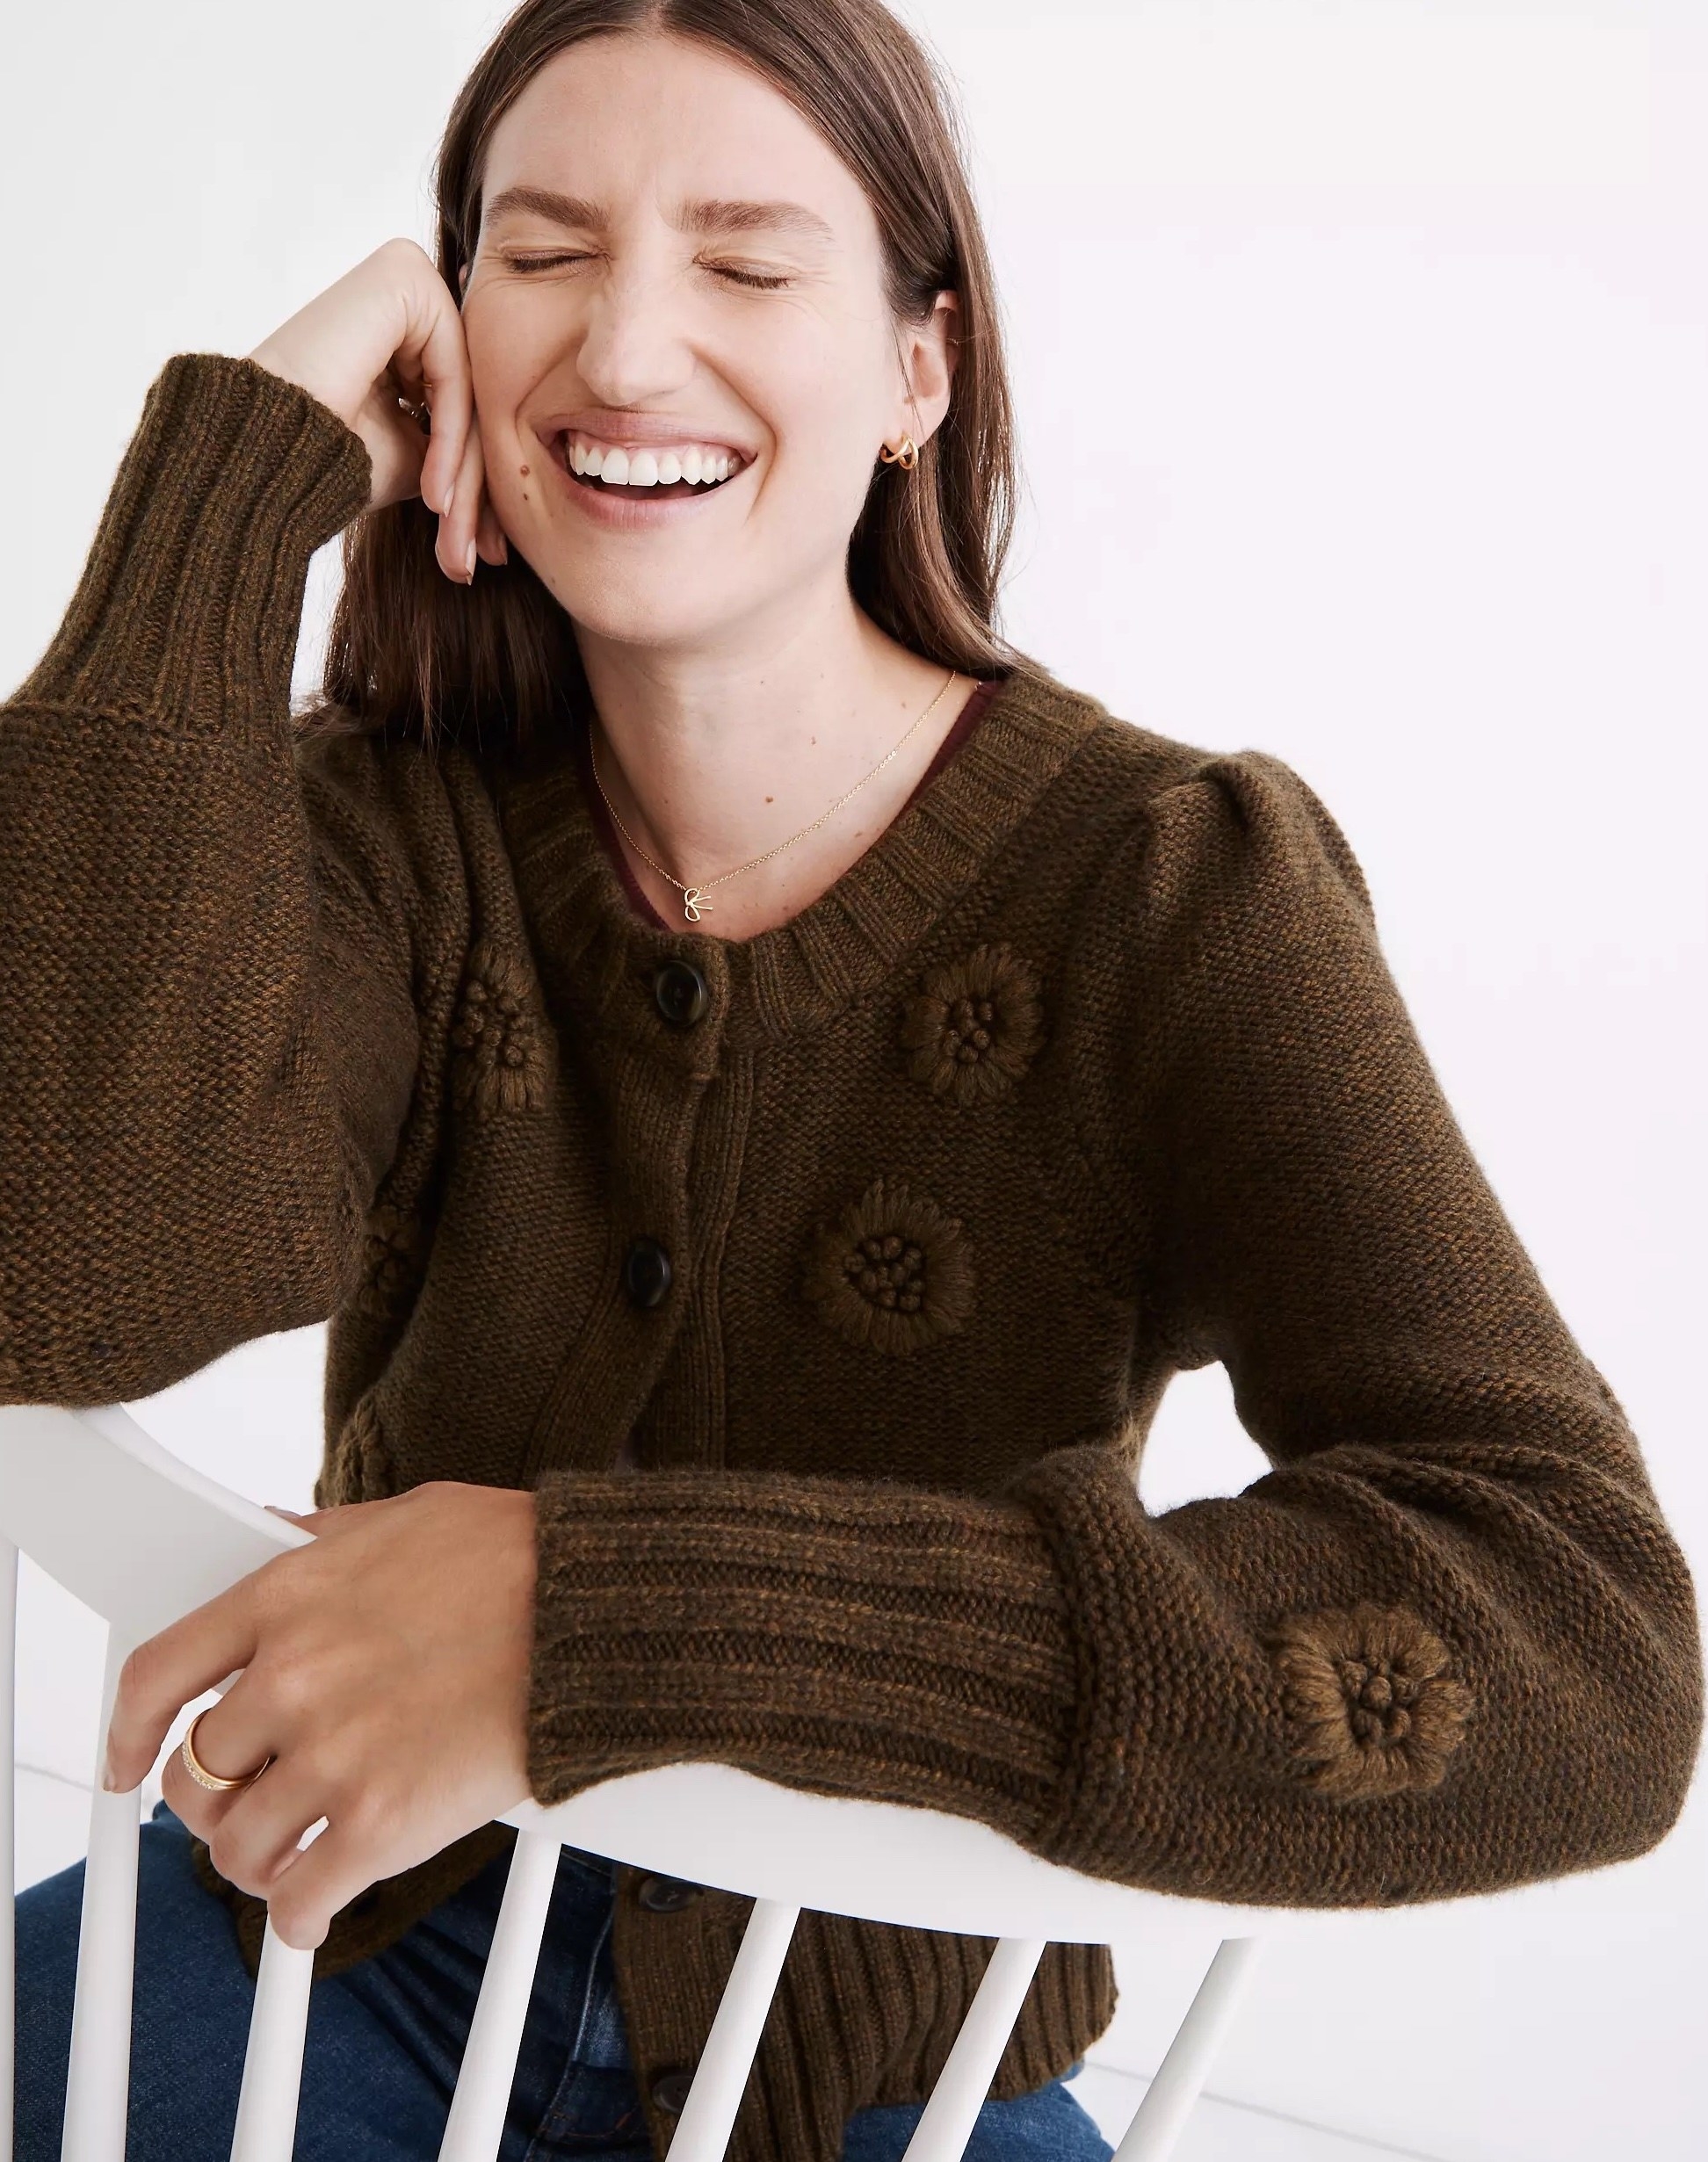 Model wearing brown cardigan with jeans